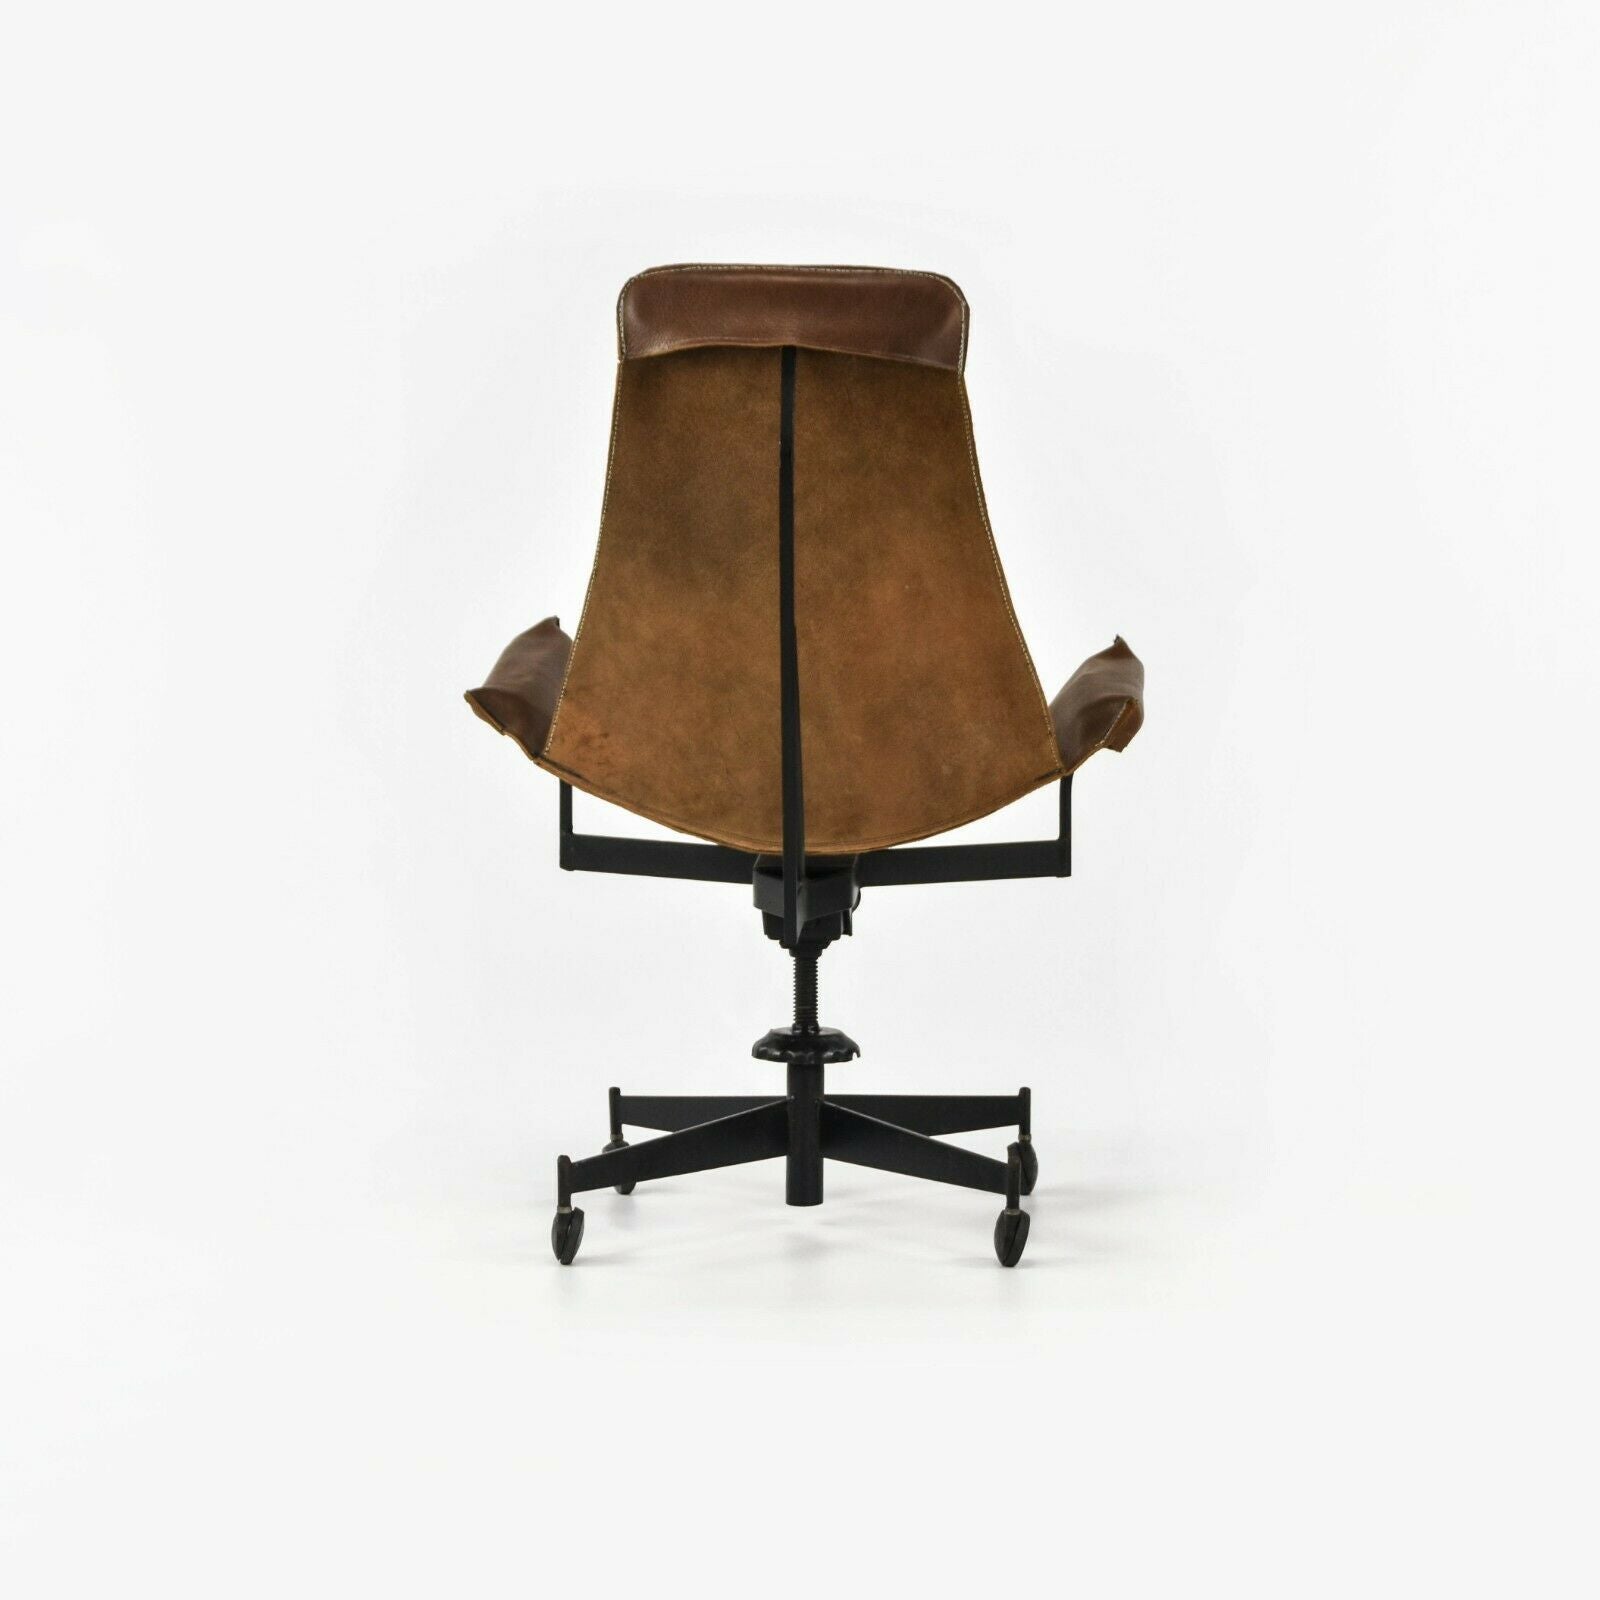 1969 William Katavolos Swivel K Chair Desk Chair for Leathercrafter with Brown Sling